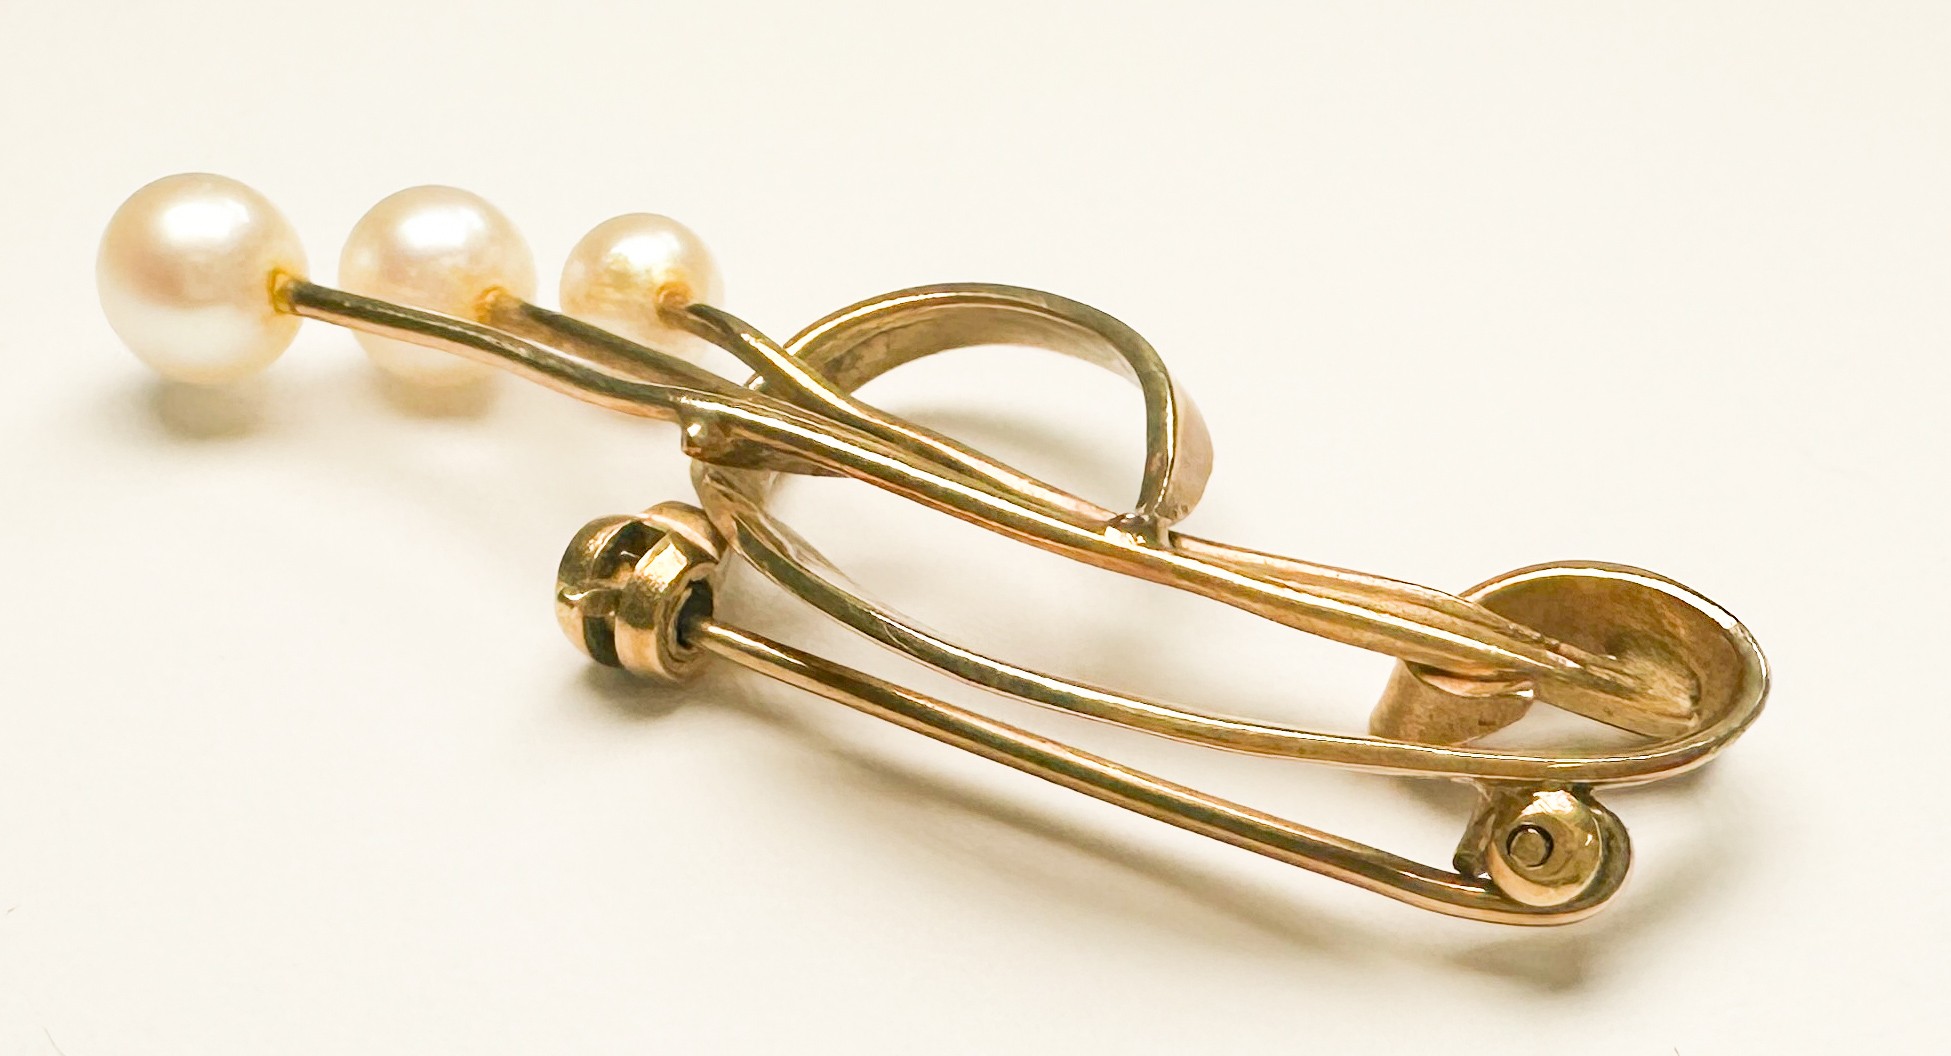 A 9ct gold brooch with three cultured pearls in an open spray design, weighs 3.6 grams.